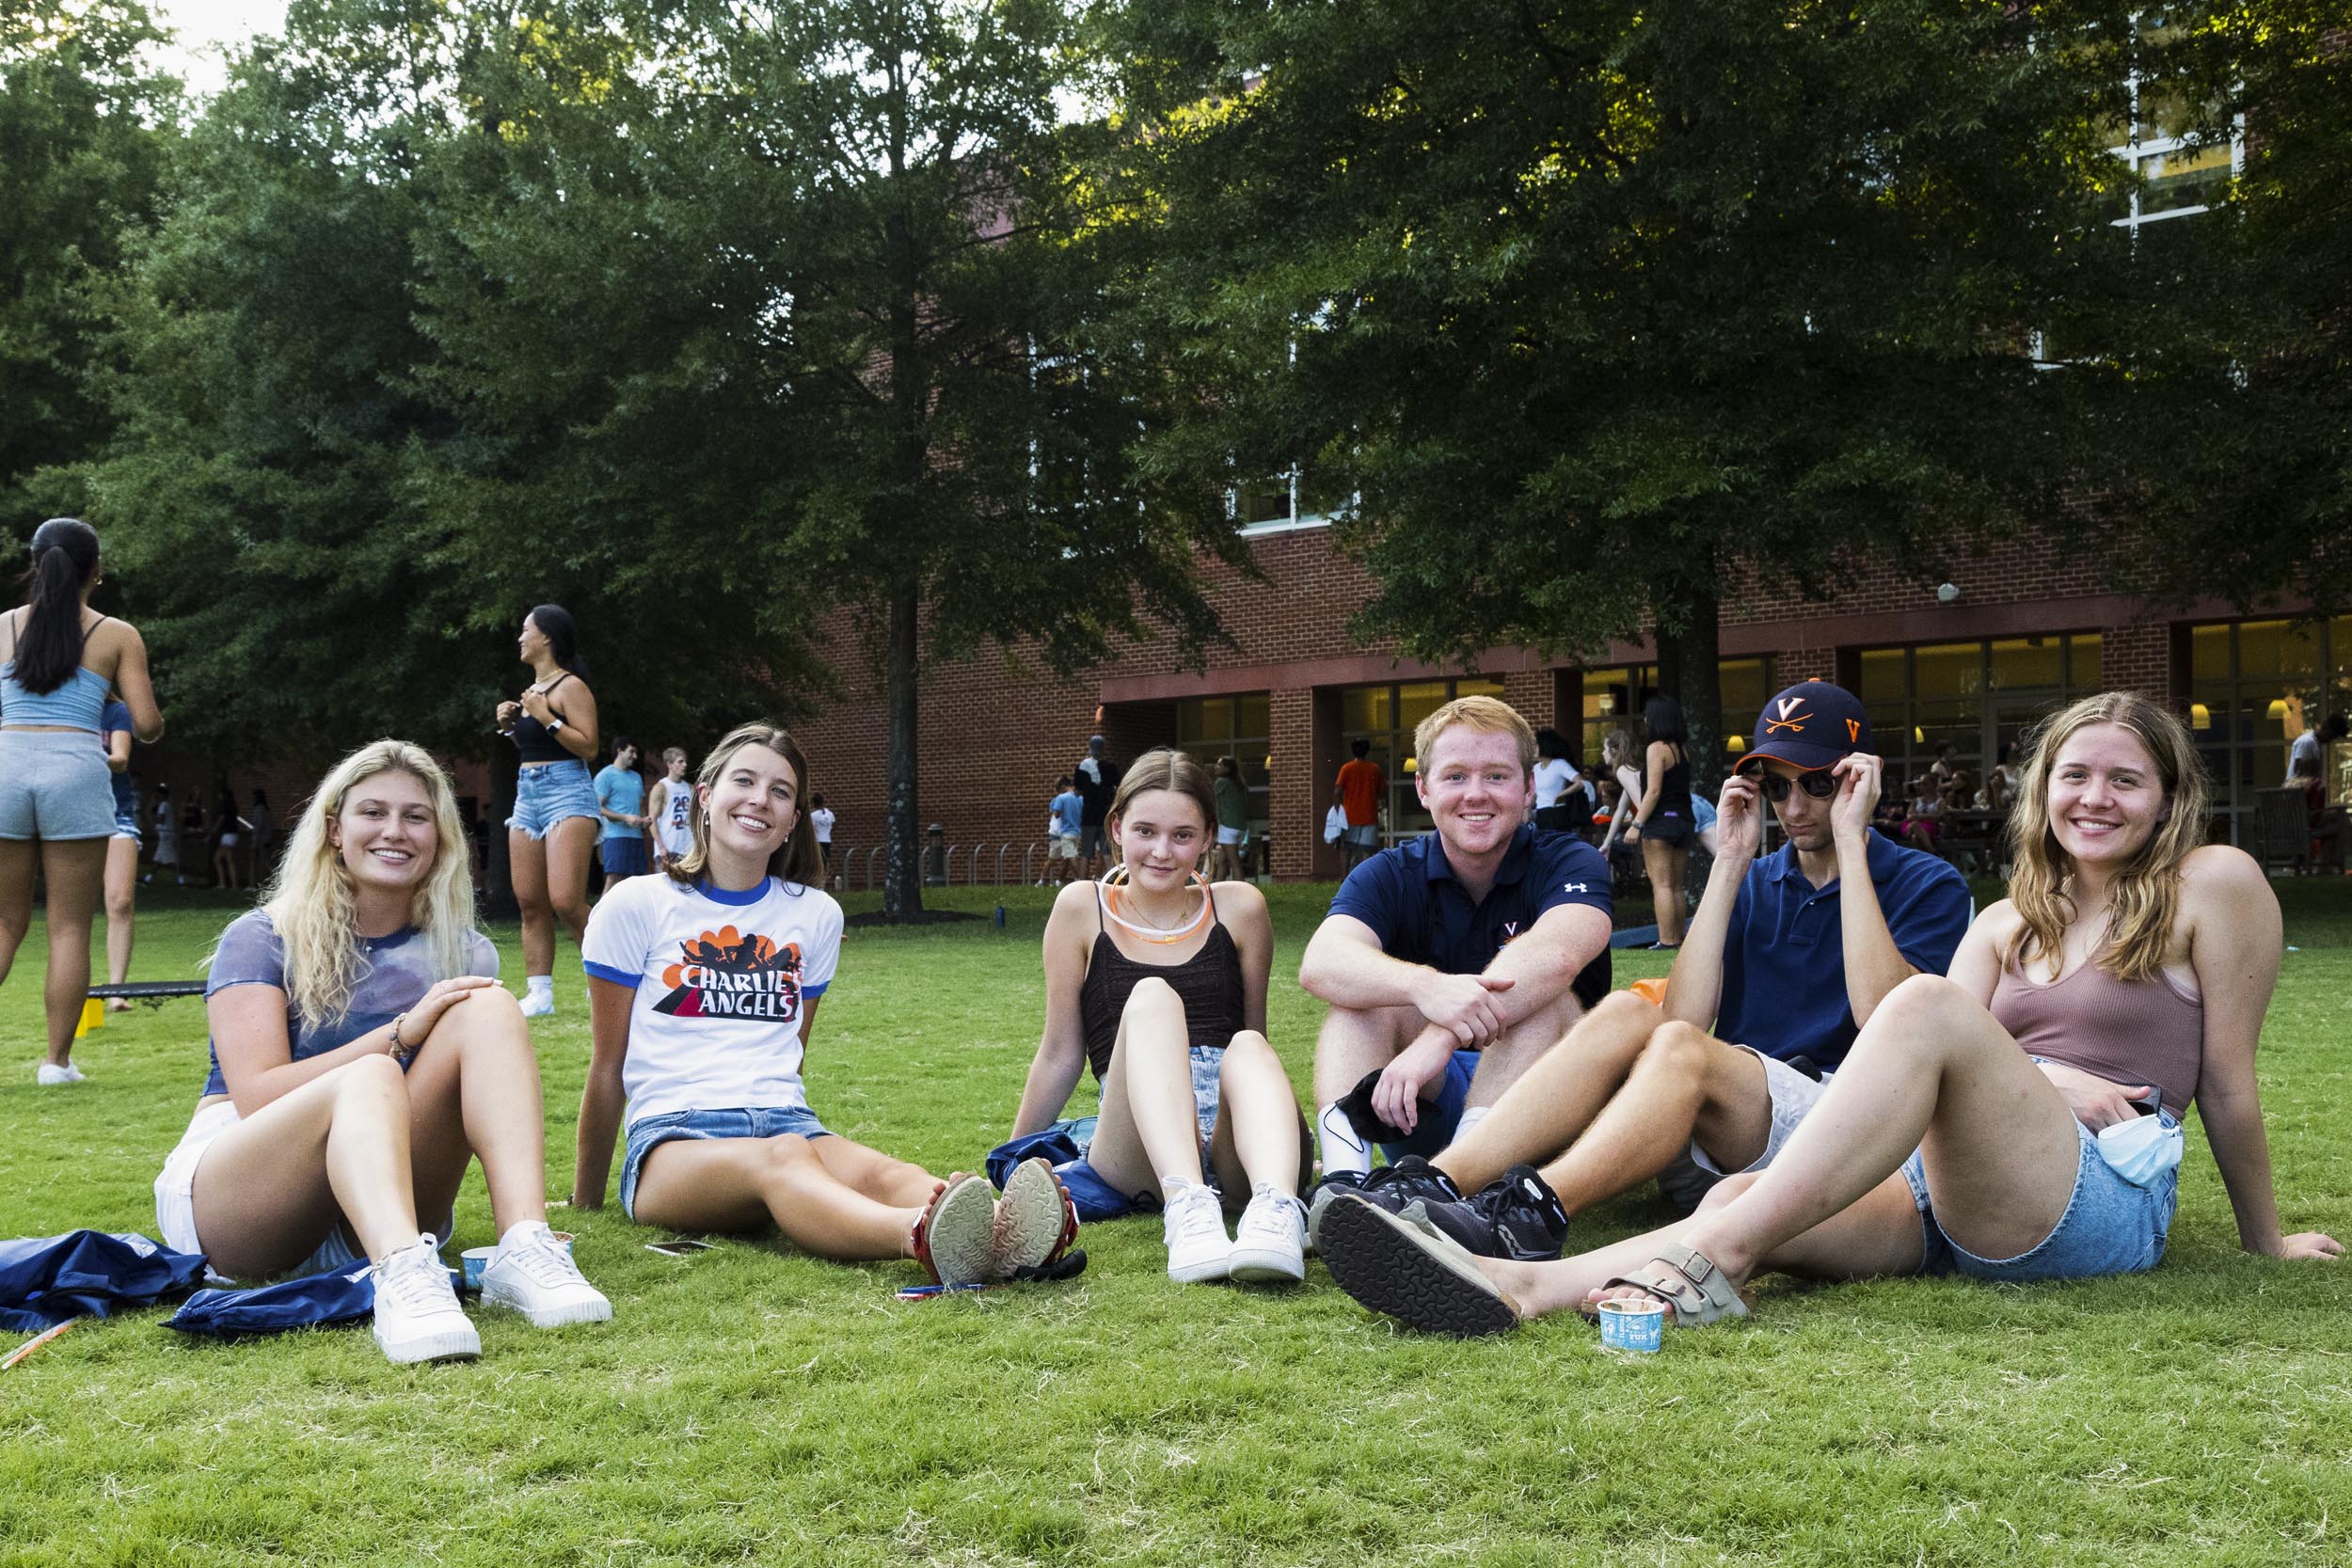 Students sitting together in the grass outside of a dorm building on Grounds